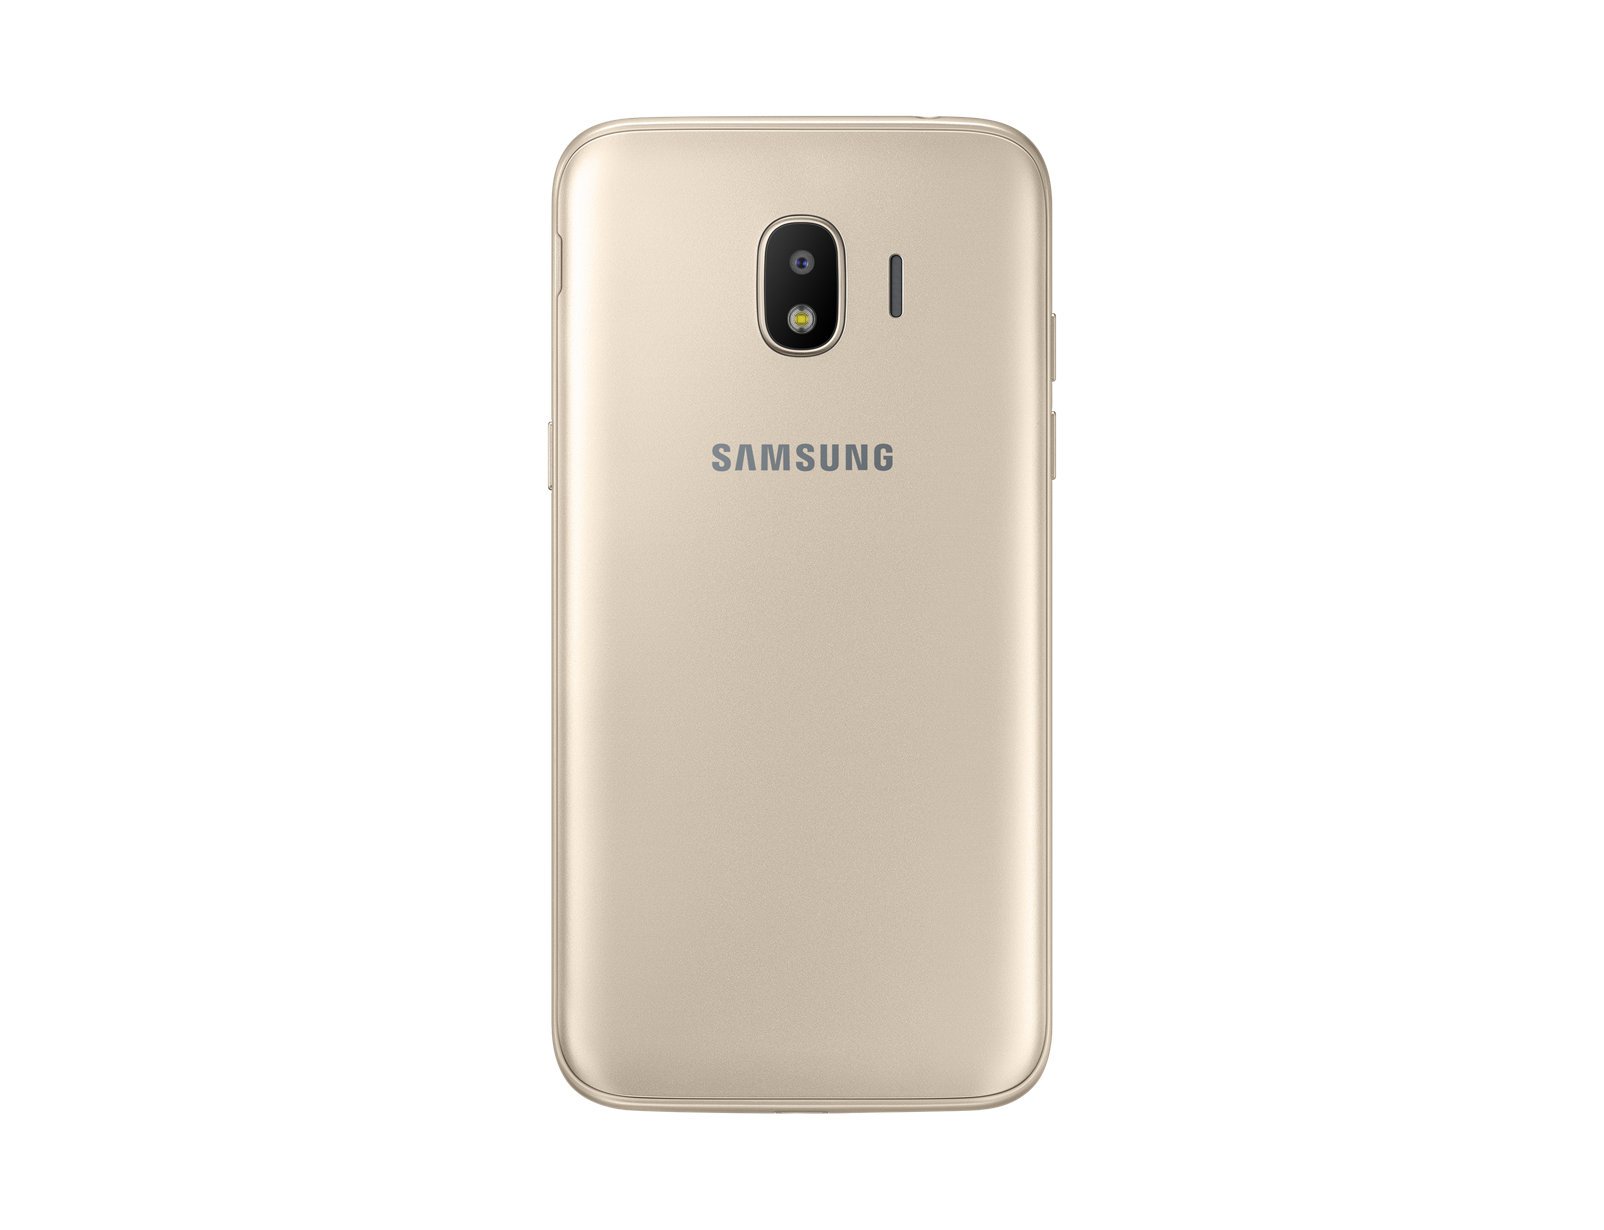 Samsung Galaxy Grand Prime Pro Specs Review Release Date